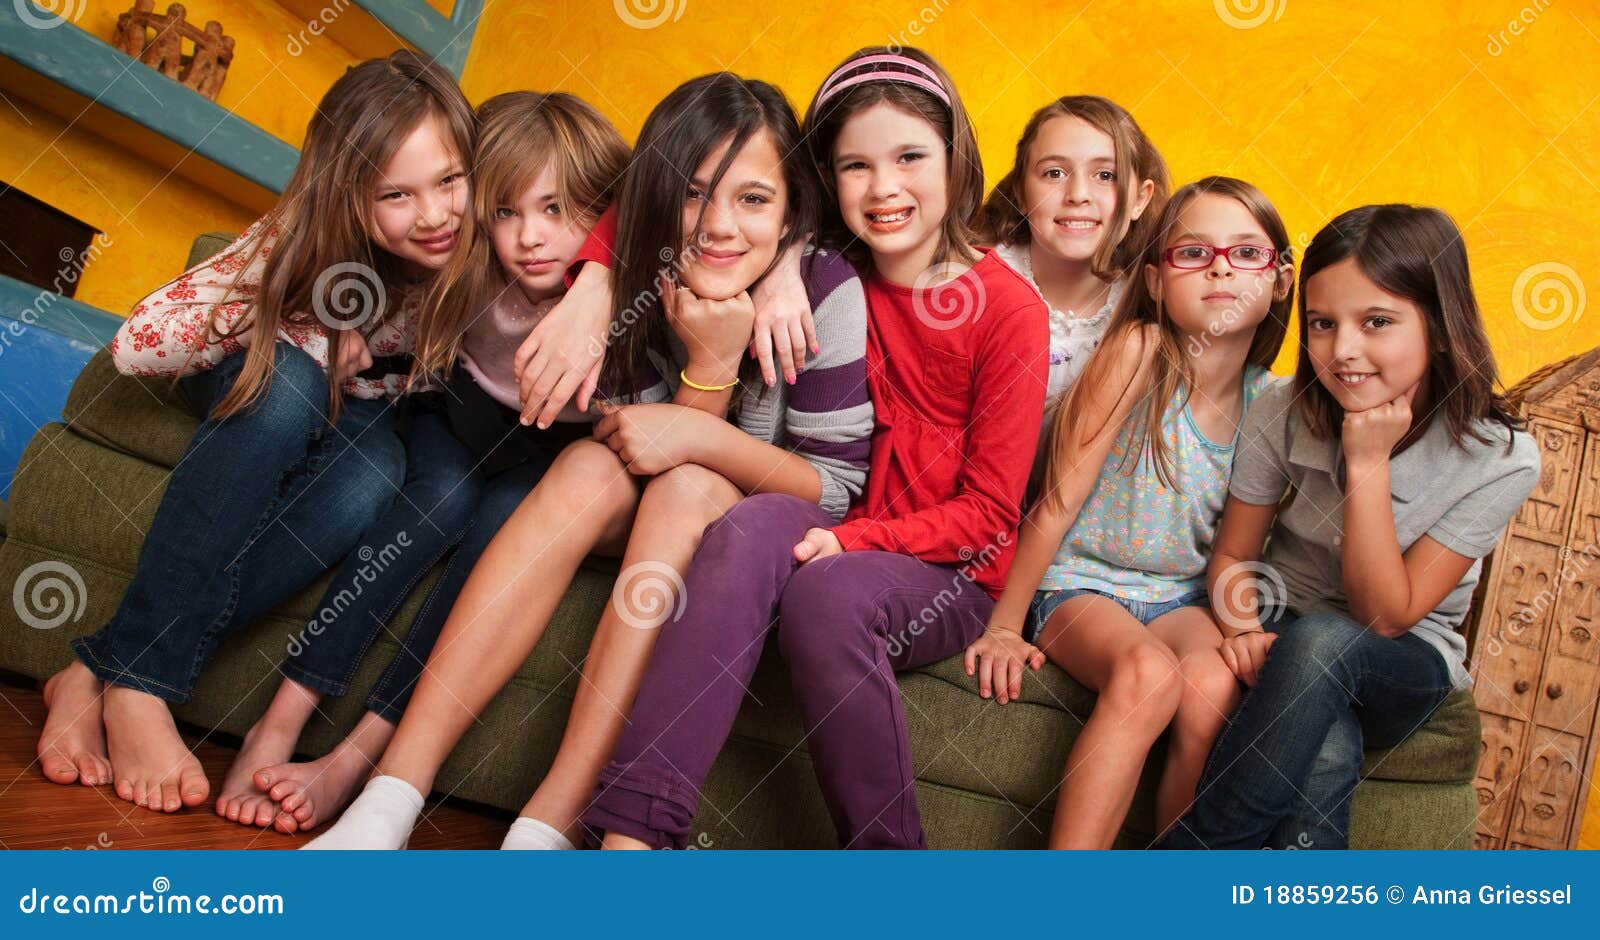 group of young girls